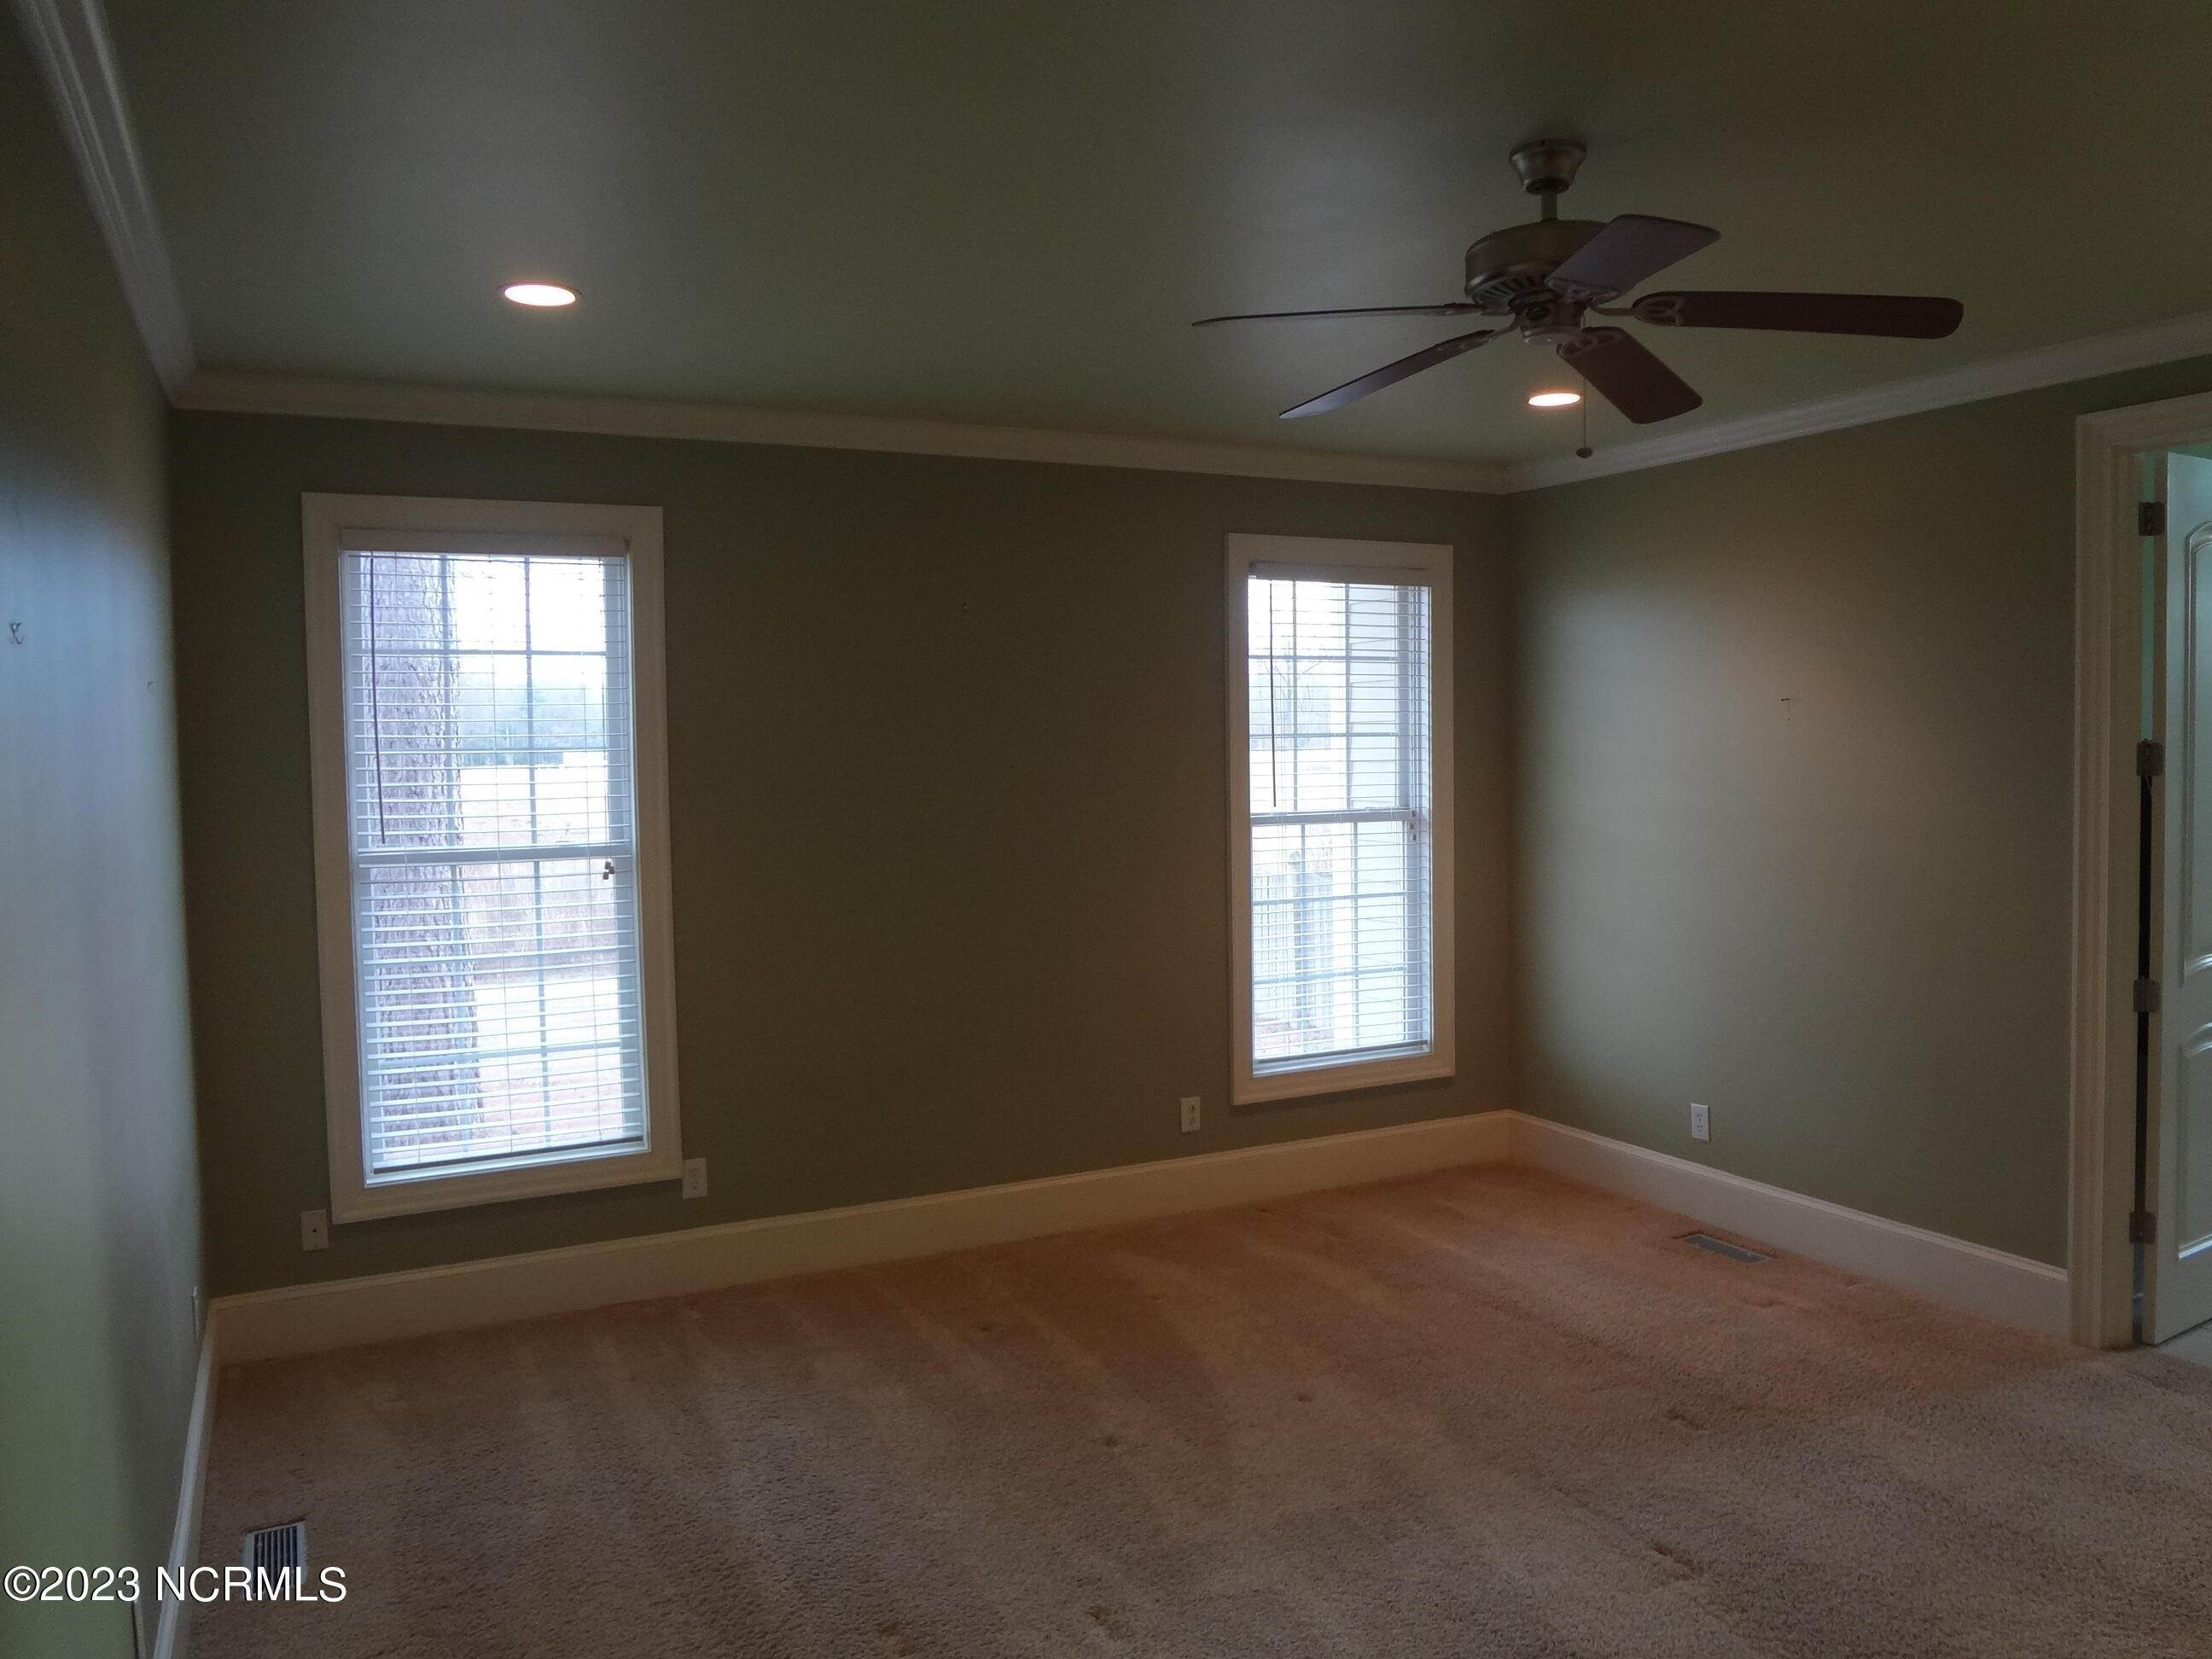 31. Single Family for Sale at Greenville, NC 27858